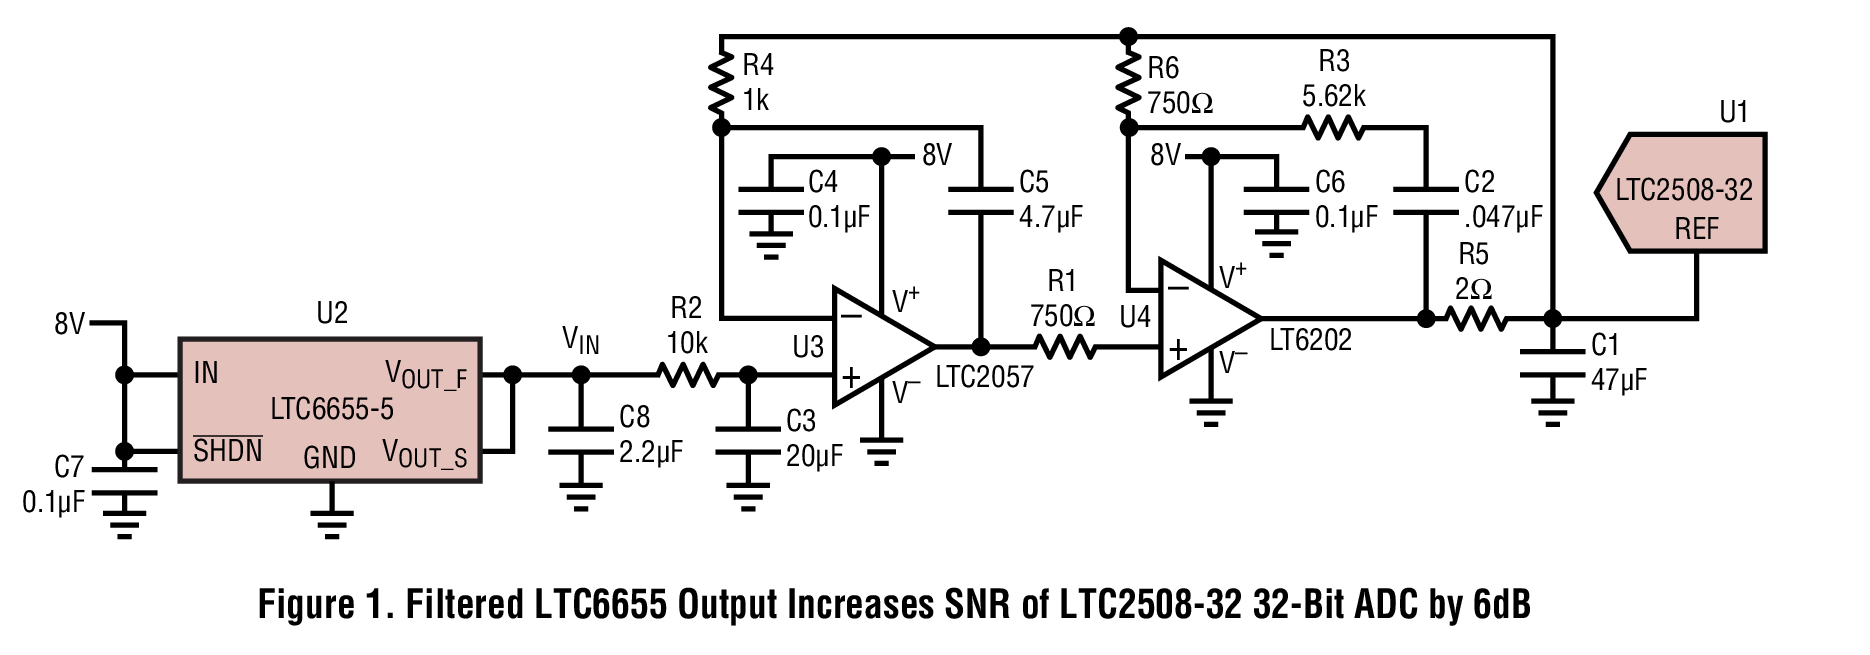 Figure 1. Filtered LTC6655 Output Increases SNR of LTC2508-32 32-Bit ADC by 6dB